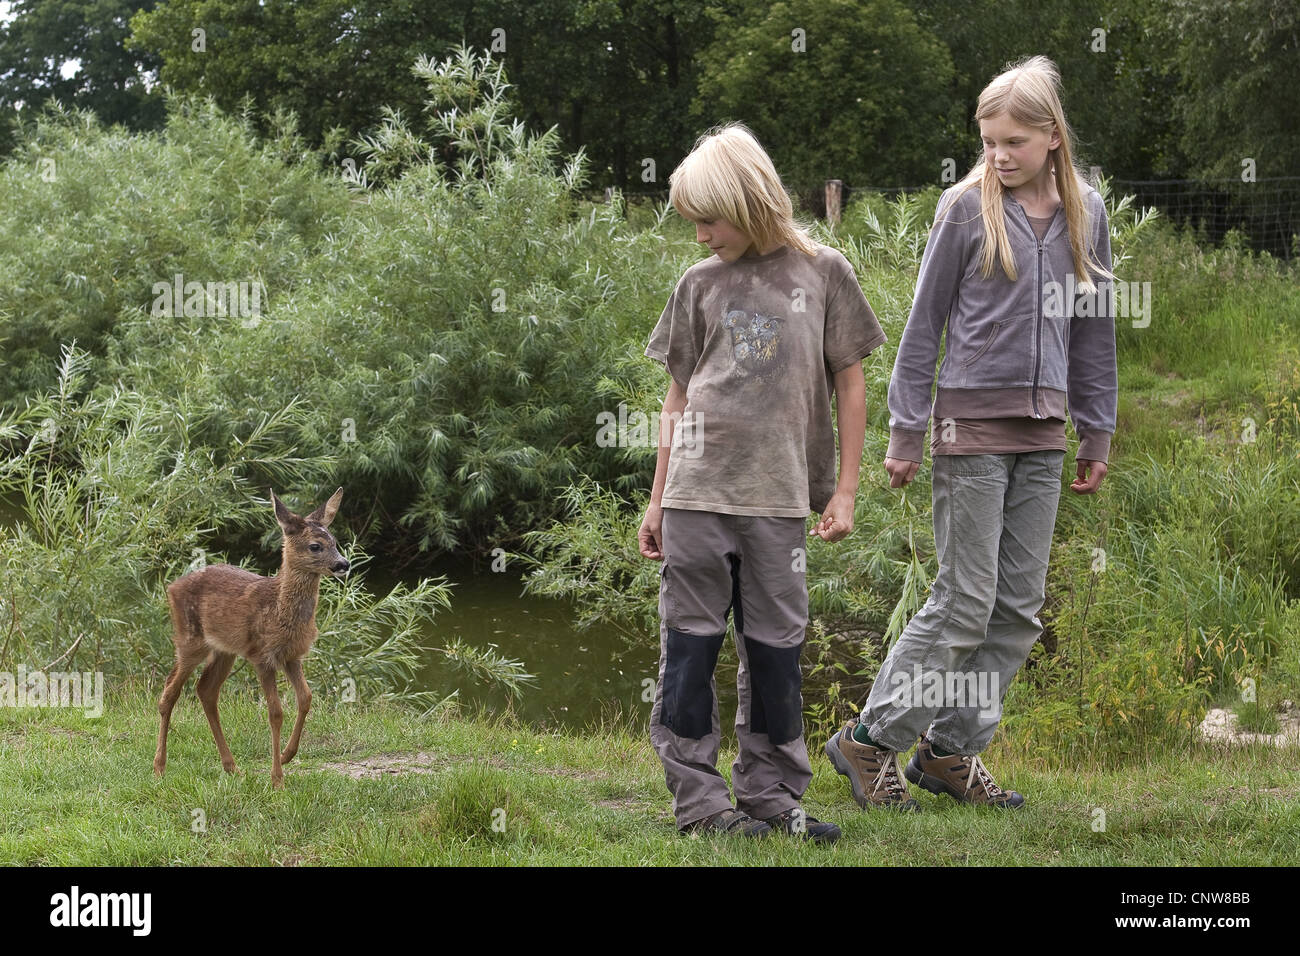 roe deer (Capreolus capreolus), fawn being raised by man is following two children at every turn, Germany Stock Photo